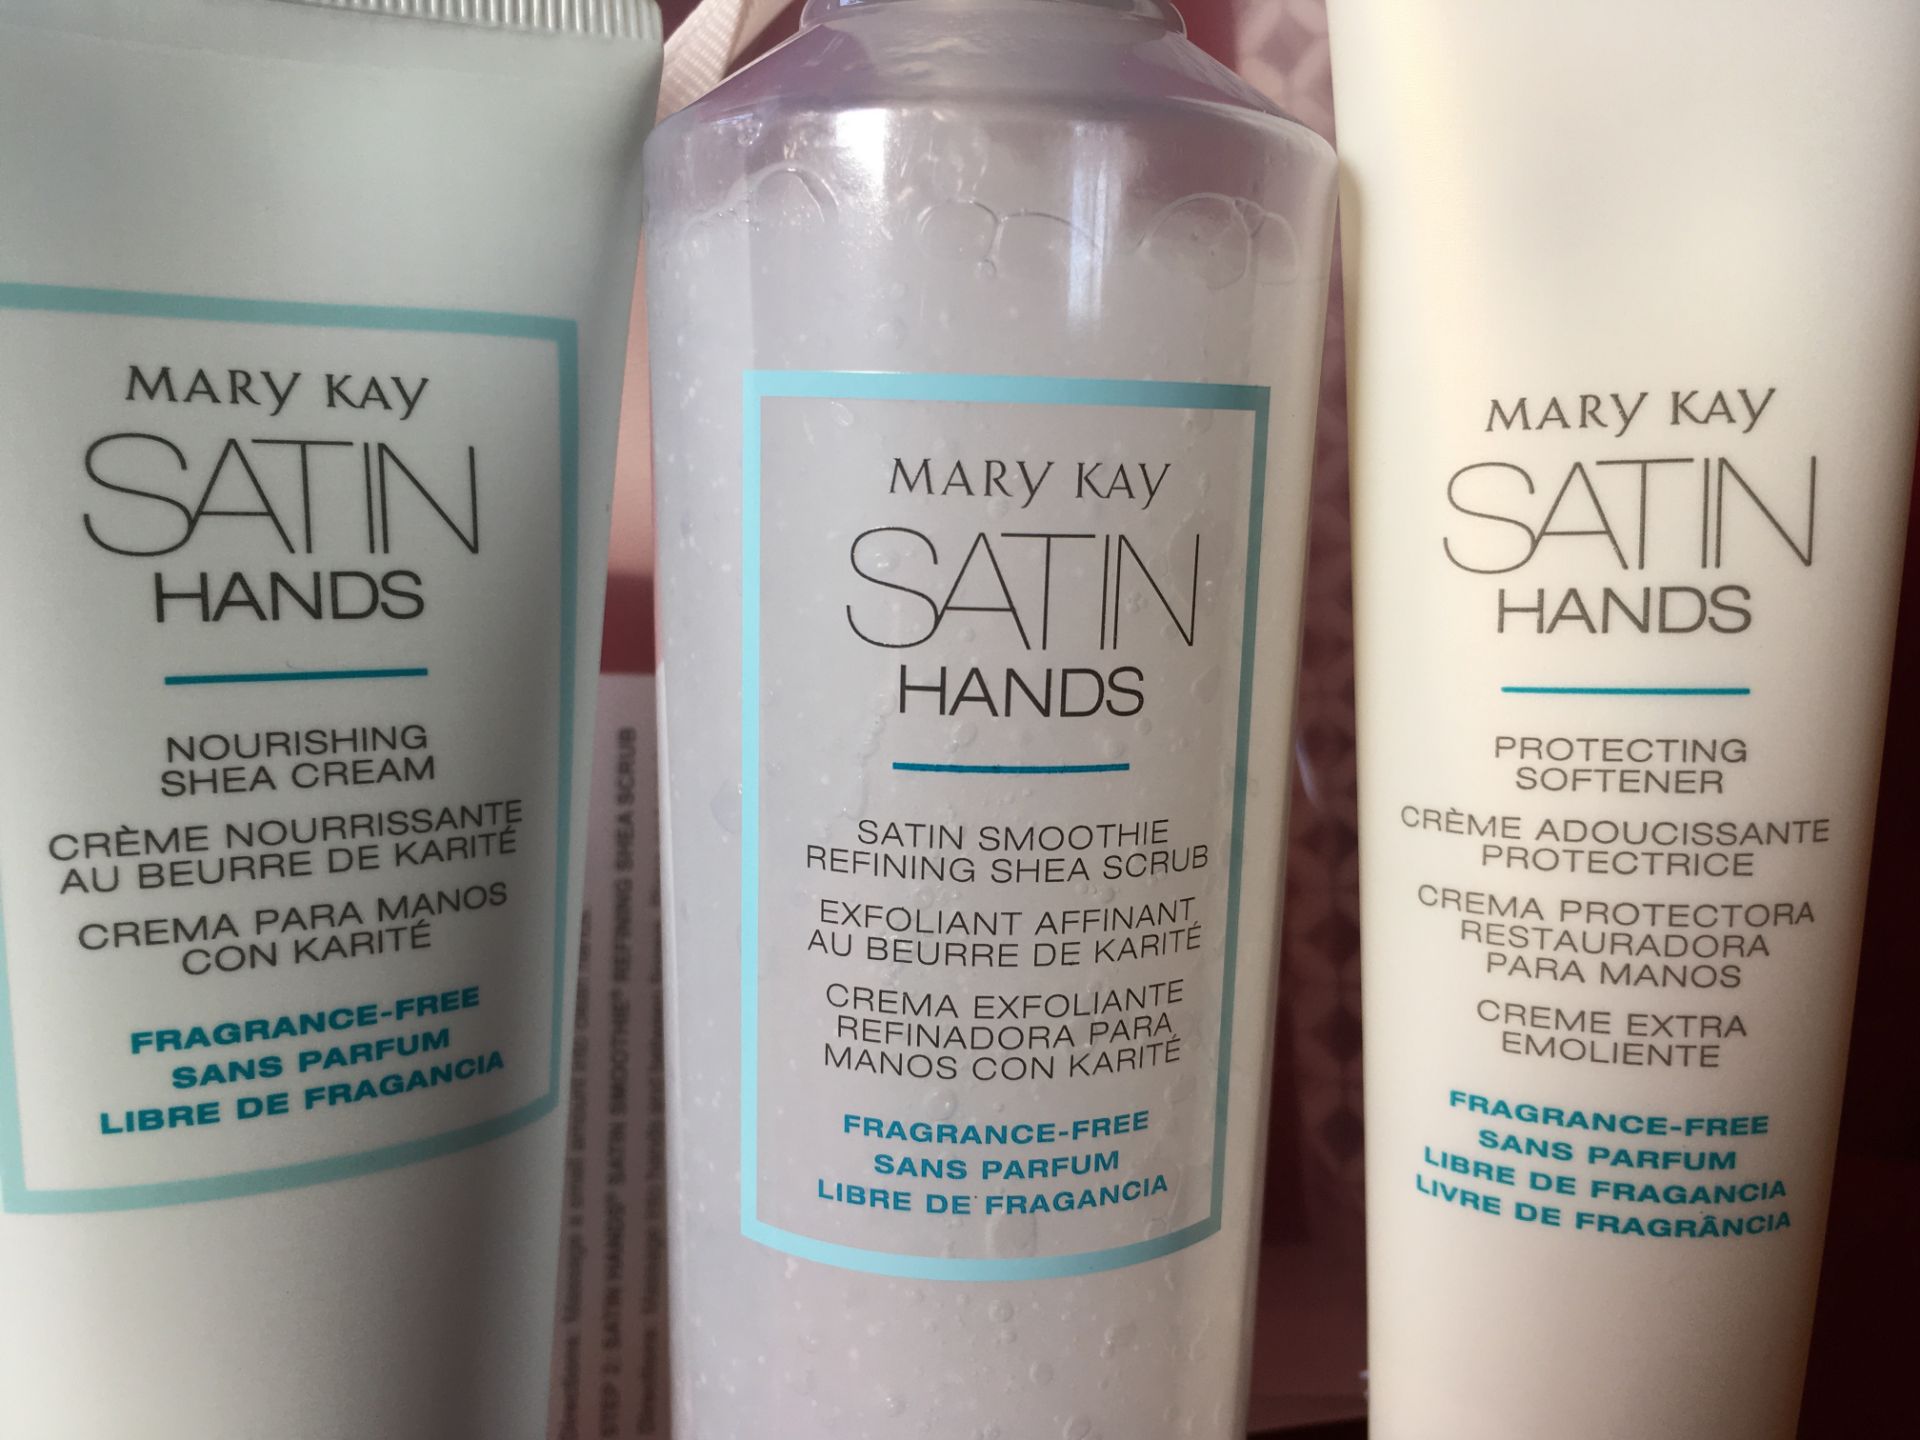 MARY KAY FRAGRANCE FREE SATIN HANDS PAMPERING SET Fragrance Free Satin Hands Pampering Set - Image 2 of 2